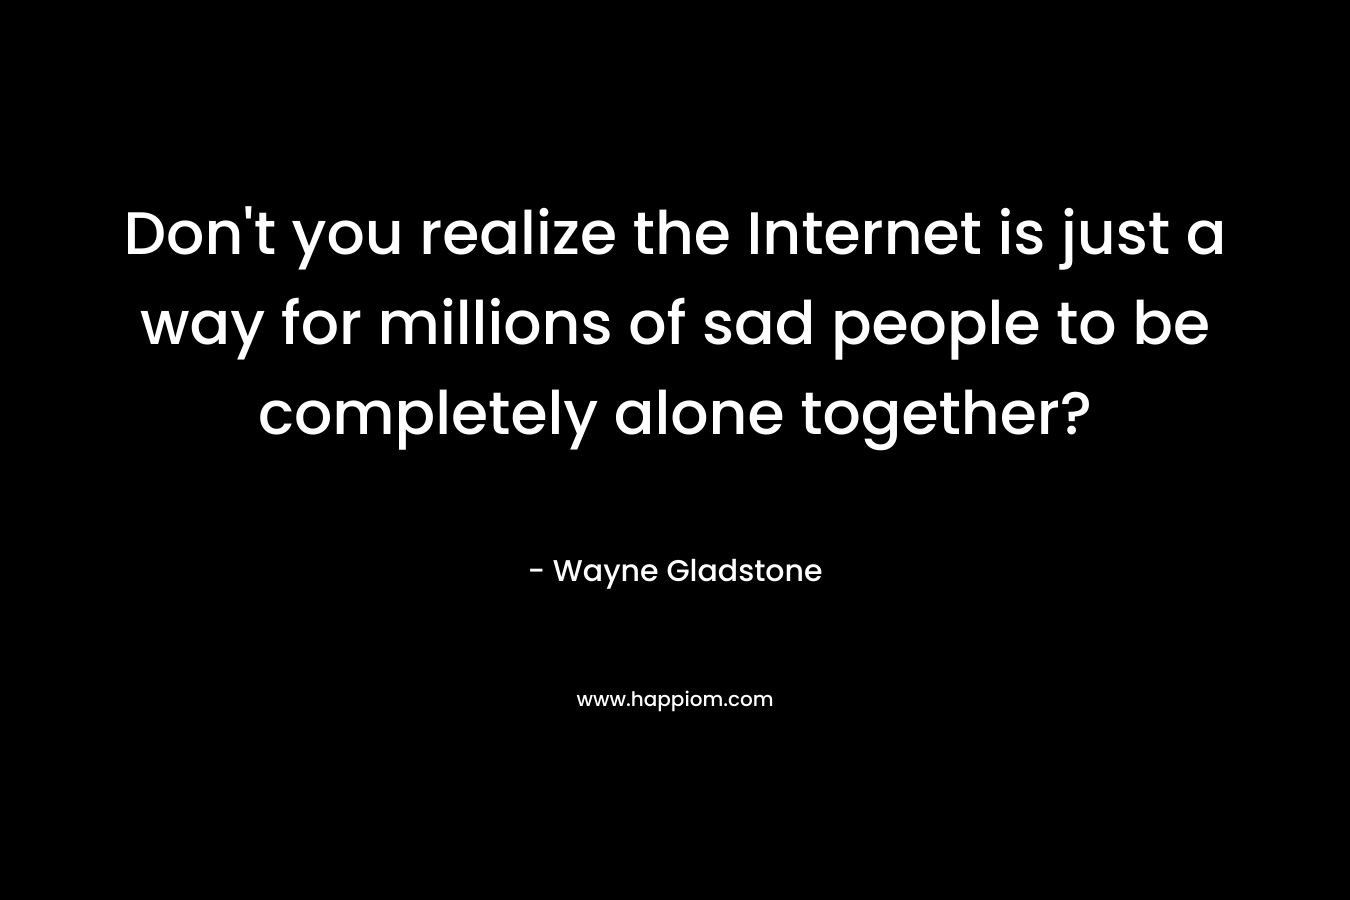 Don't you realize the Internet is just a way for millions of sad people to be completely alone together?